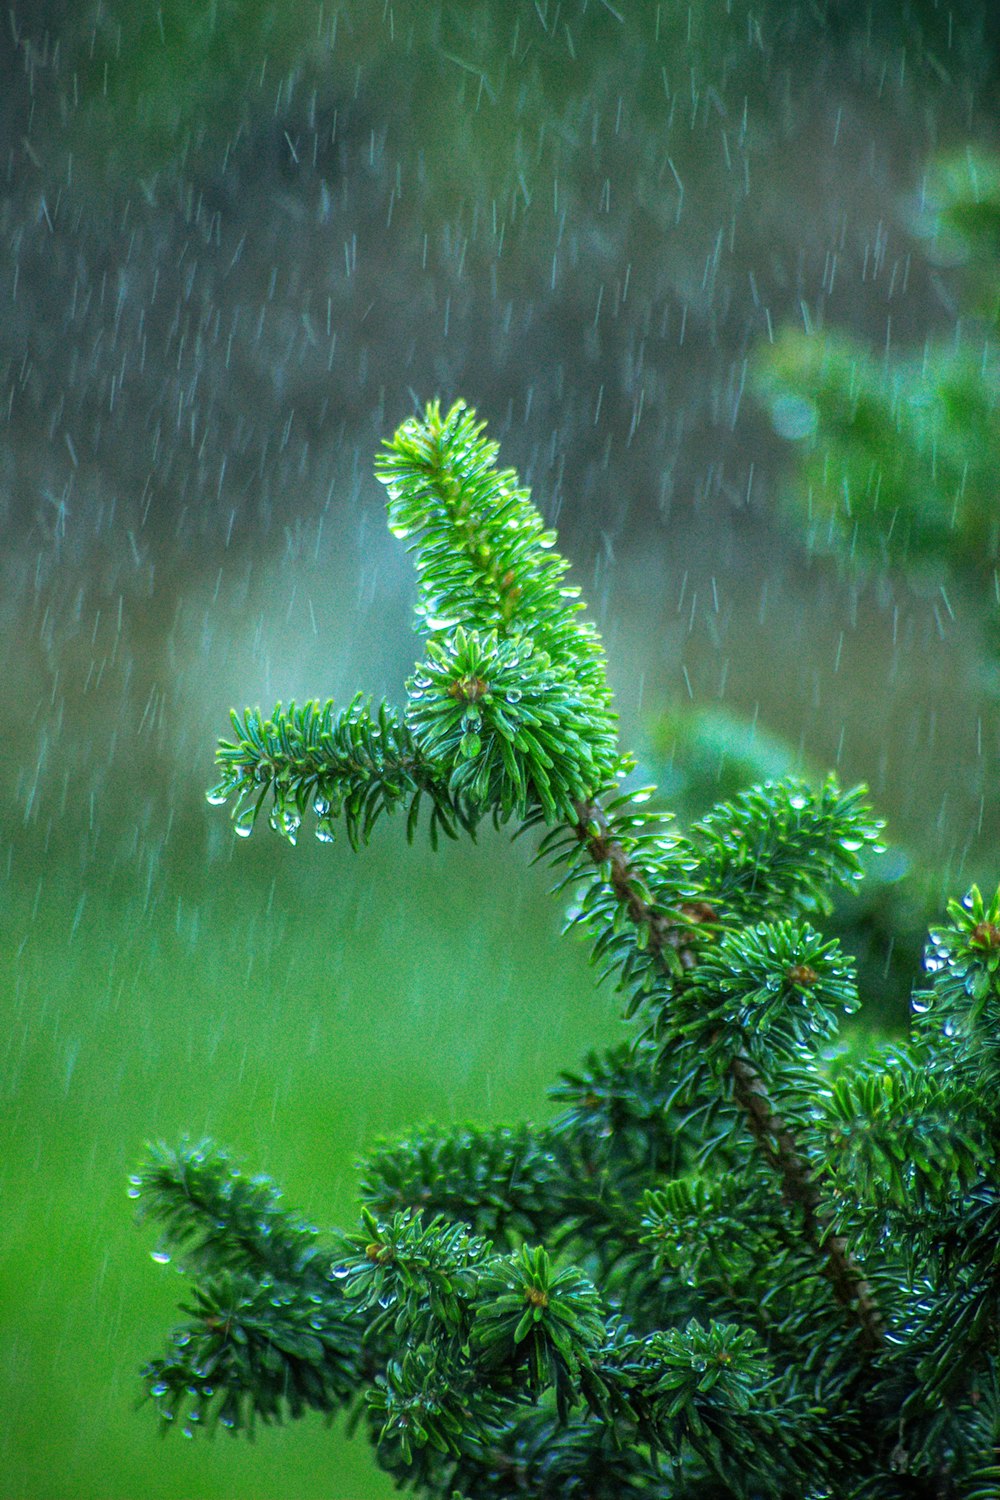 a close up of a tree branch with rain